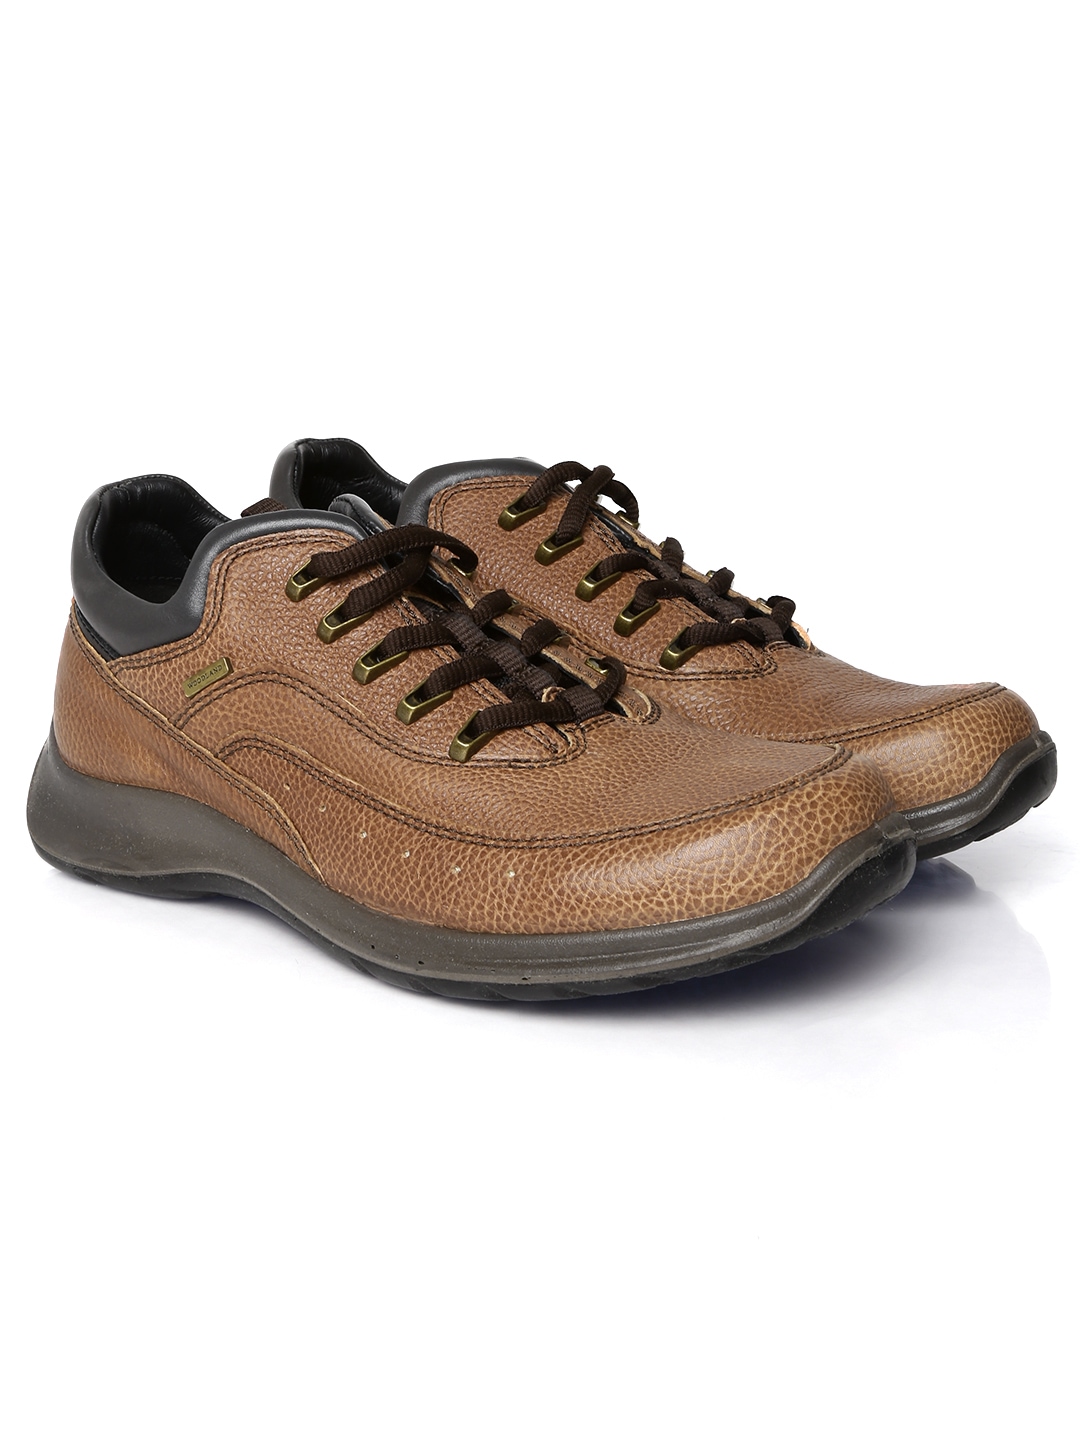 Myntra Woodland Men Brown Leather Casual Shoes 699013 | Buy Myntra ...